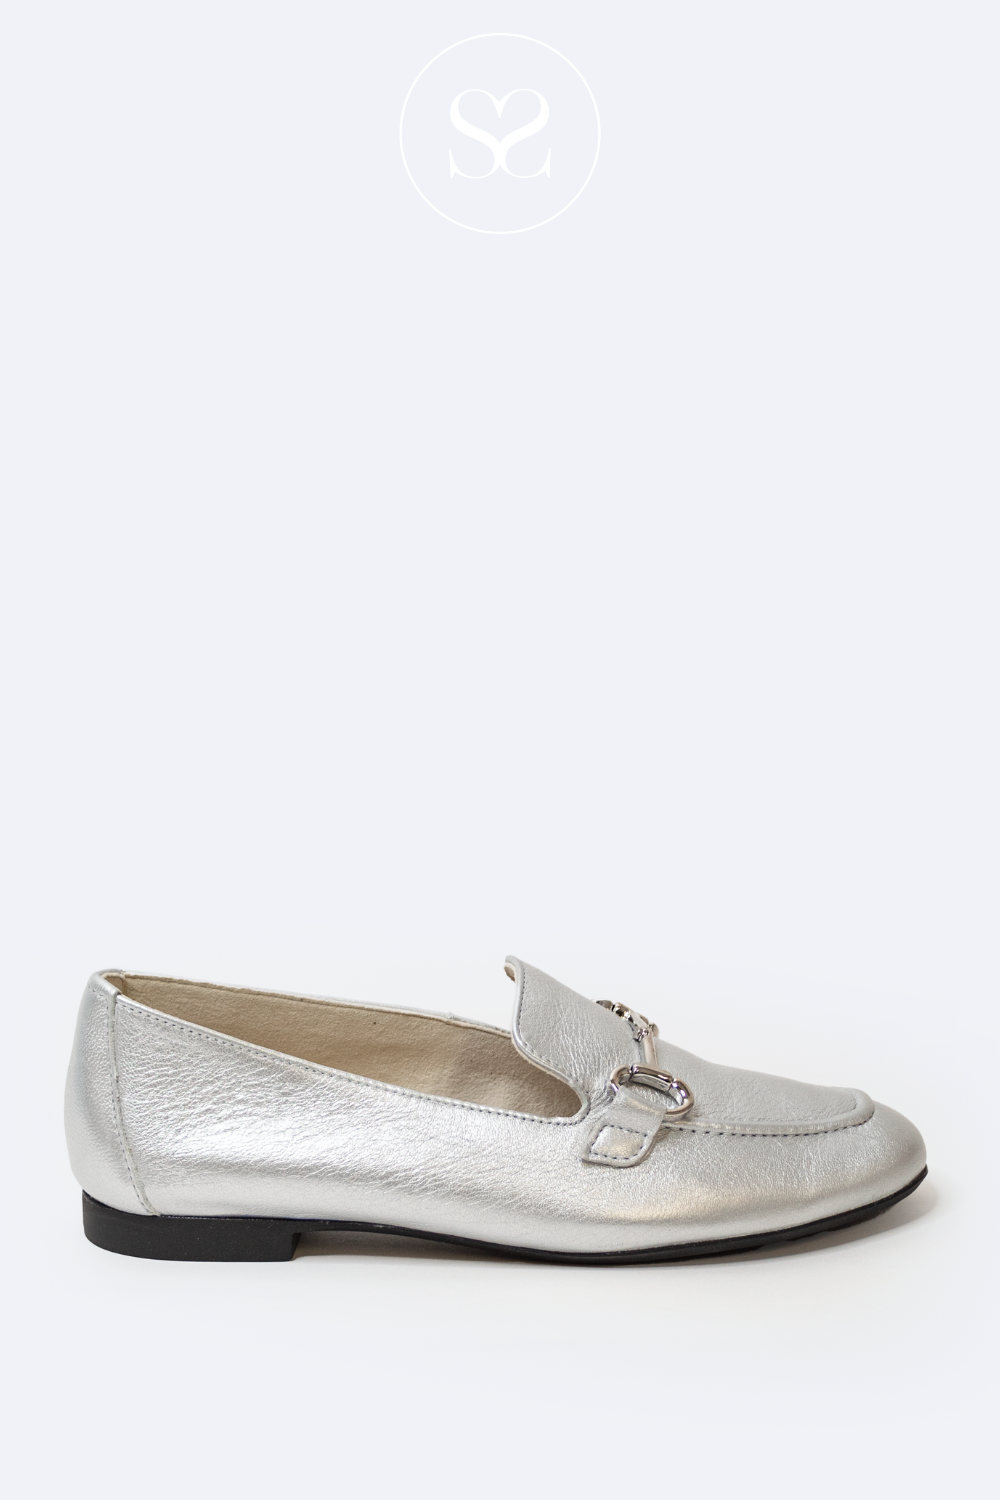 PAUL GREEN 2596 SILVER FLAT LEATHER SLIP ON LOAFER WITH SILVER BUCKLE 